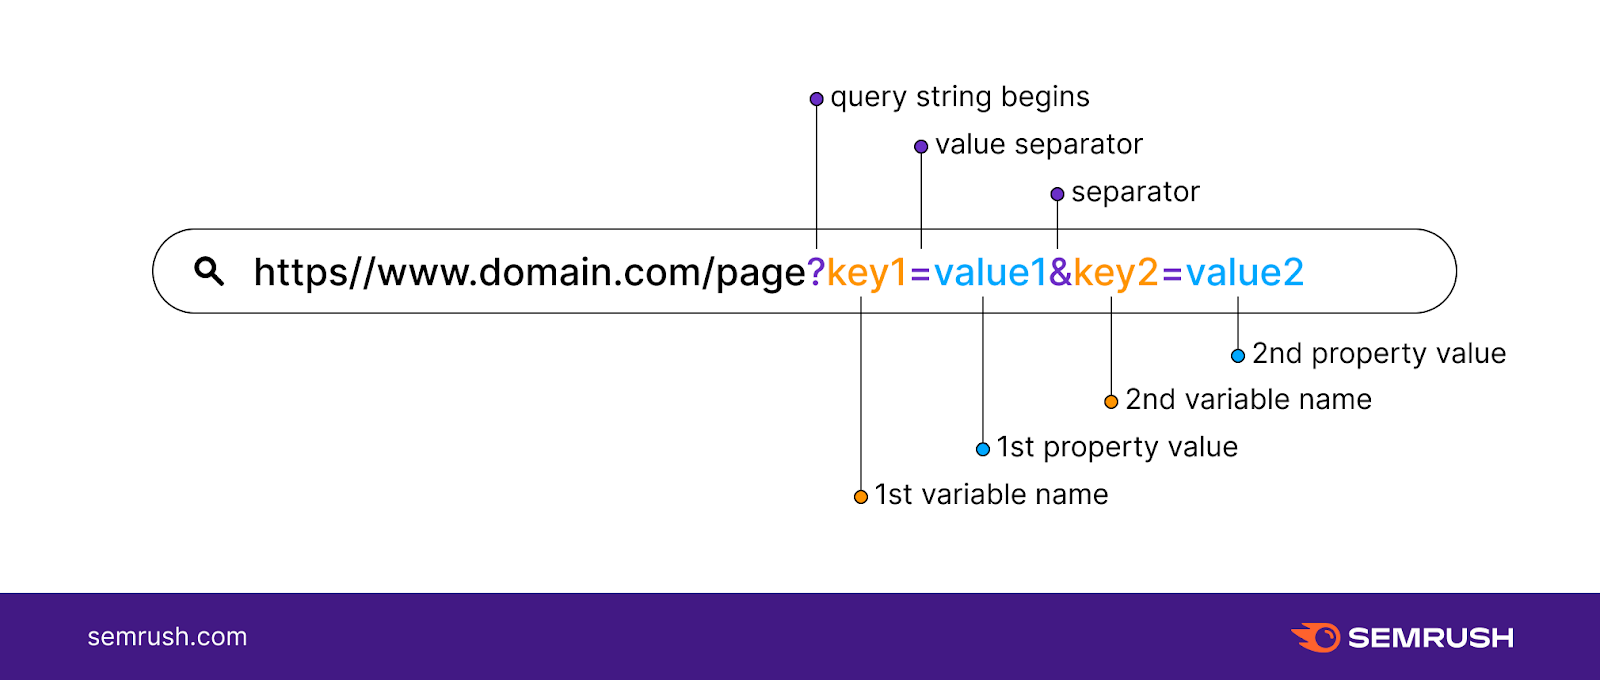 an example of a a basic structure of URL parameter